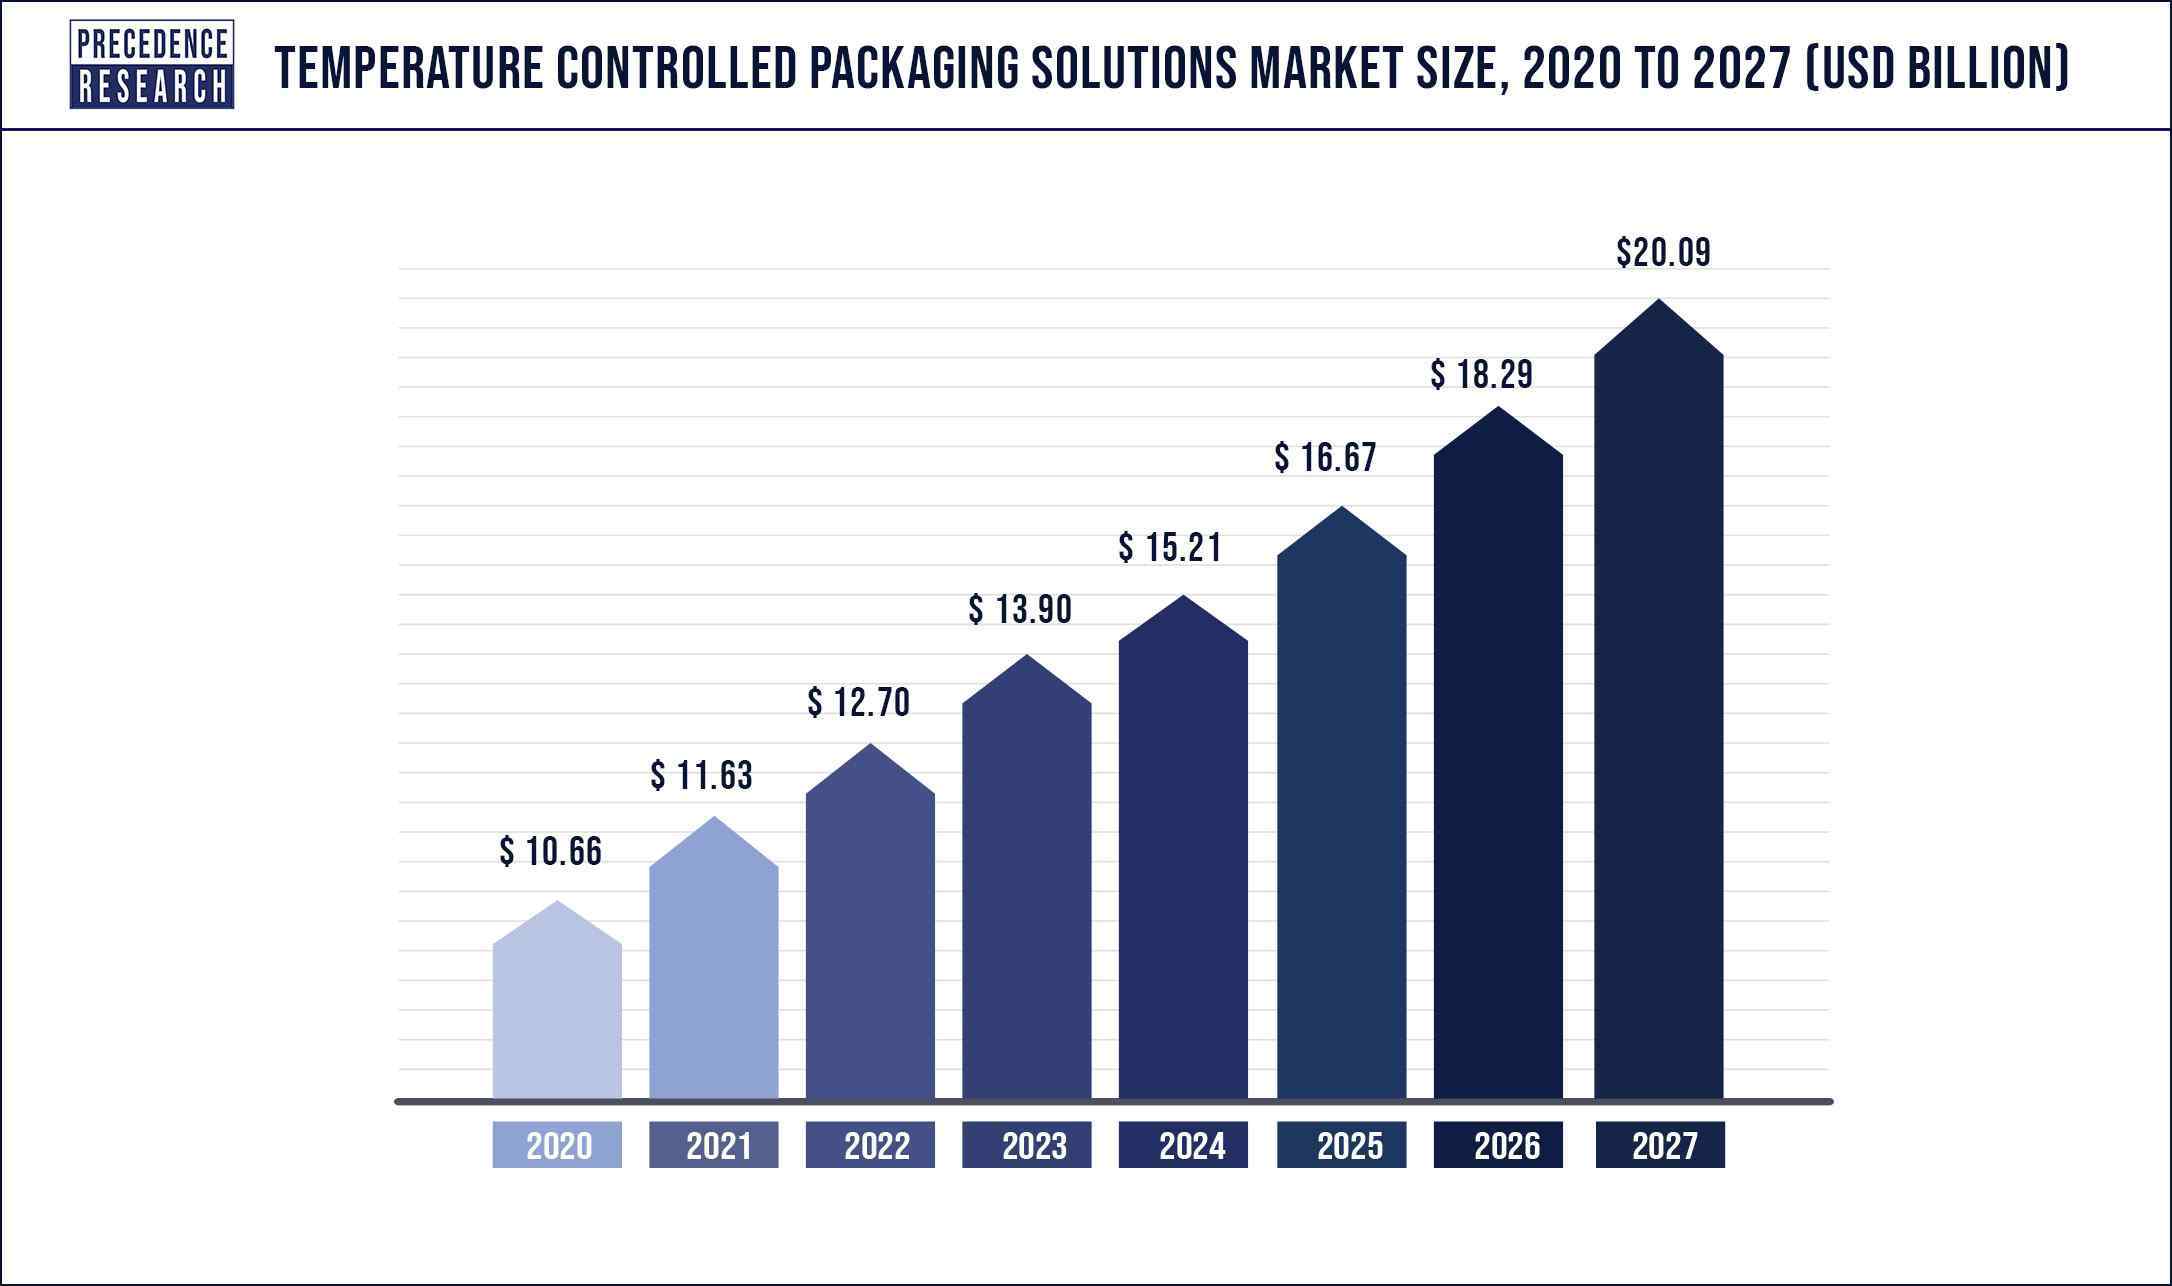 Temperature Controlled Packaging Solutions Market Size 2020 to 2027